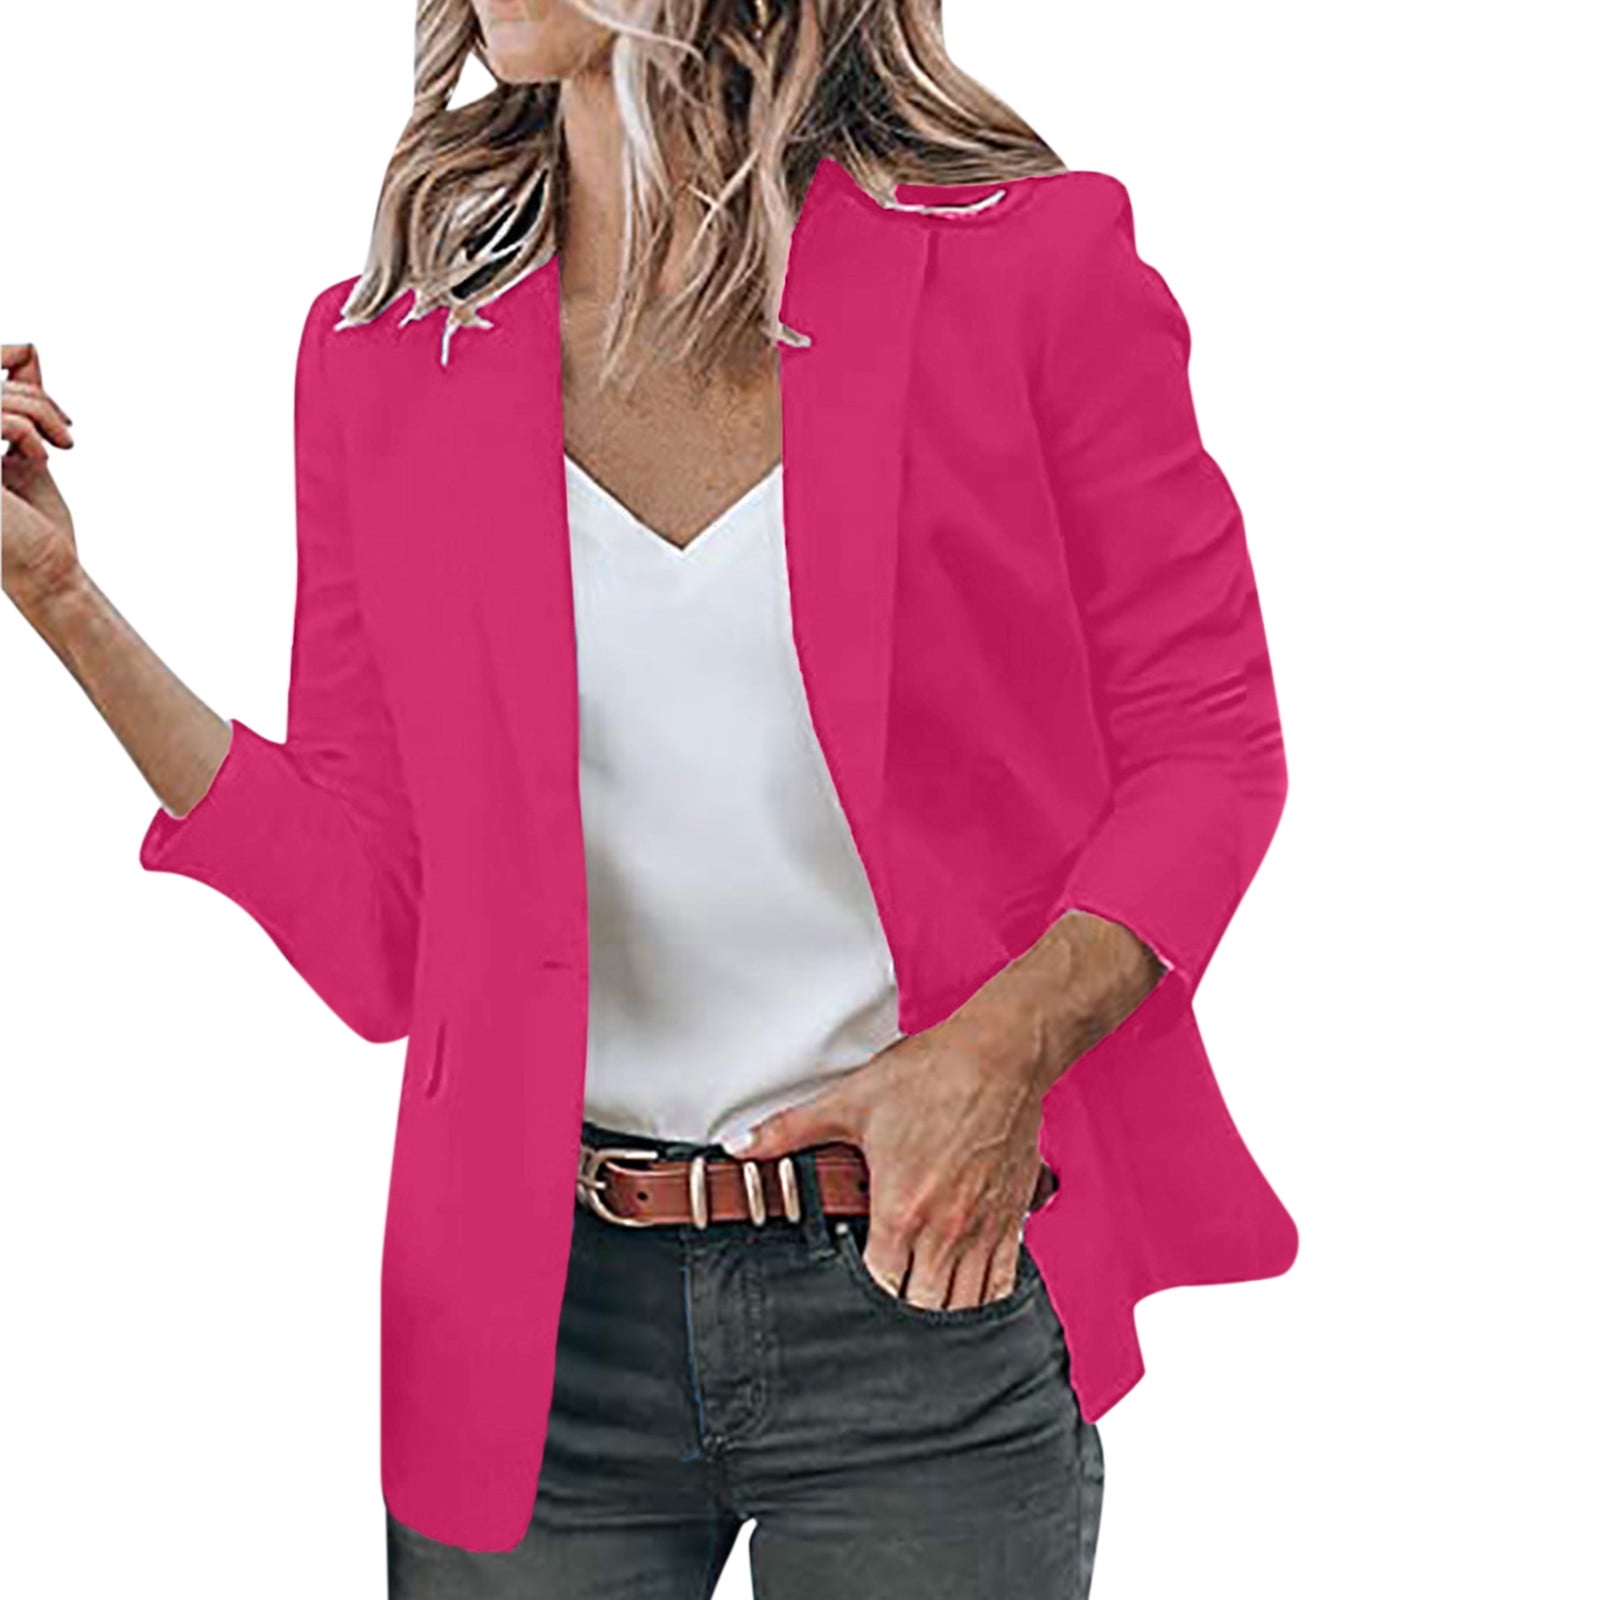 JDEFEG Long Coat Women Ladies Fashion Casual Solid Color Long Sleeve Lapel  Suit Style Small Jacket Tall Wool Coat Women Polyester,Spandex Hot Pink Xxl